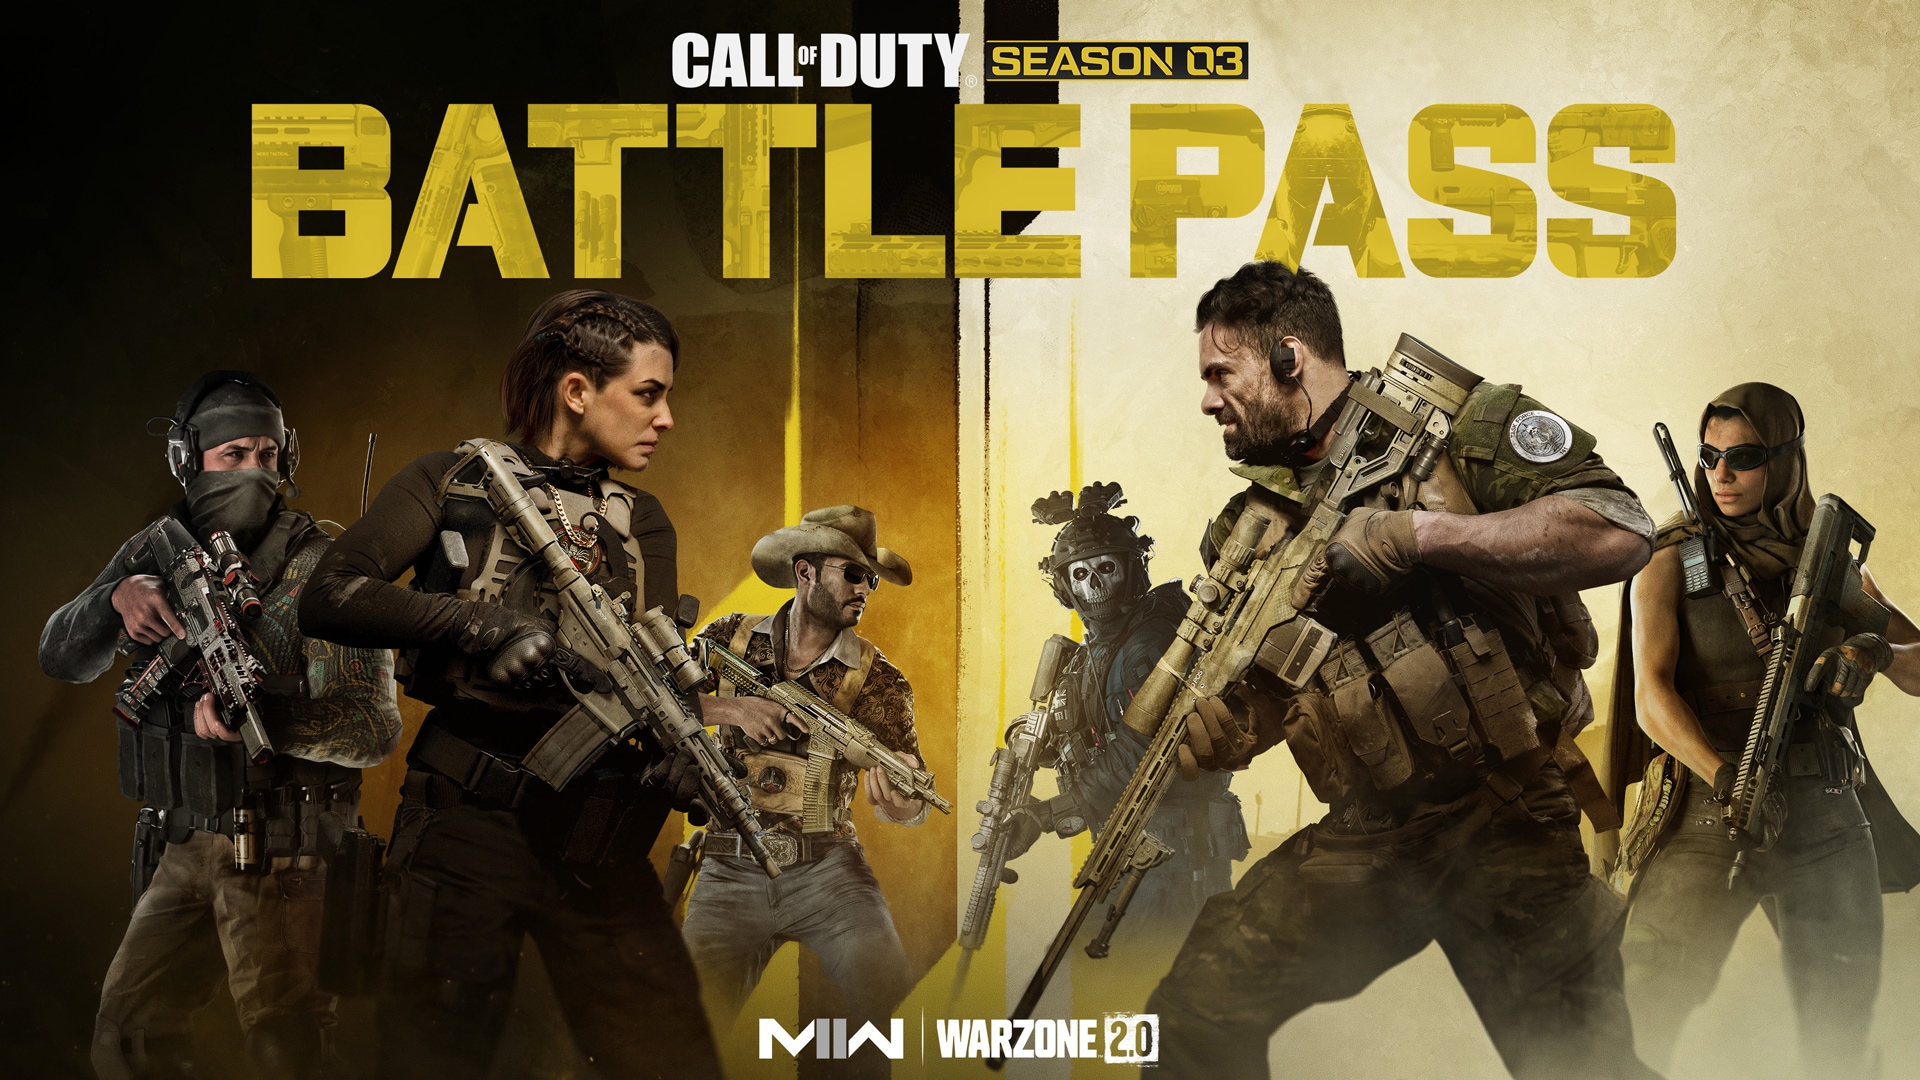 Introducing the Battle Pass and Bundles for Call of Duty: Modern Warfare II and Call of Duty: Warzone 2.0 Season 03